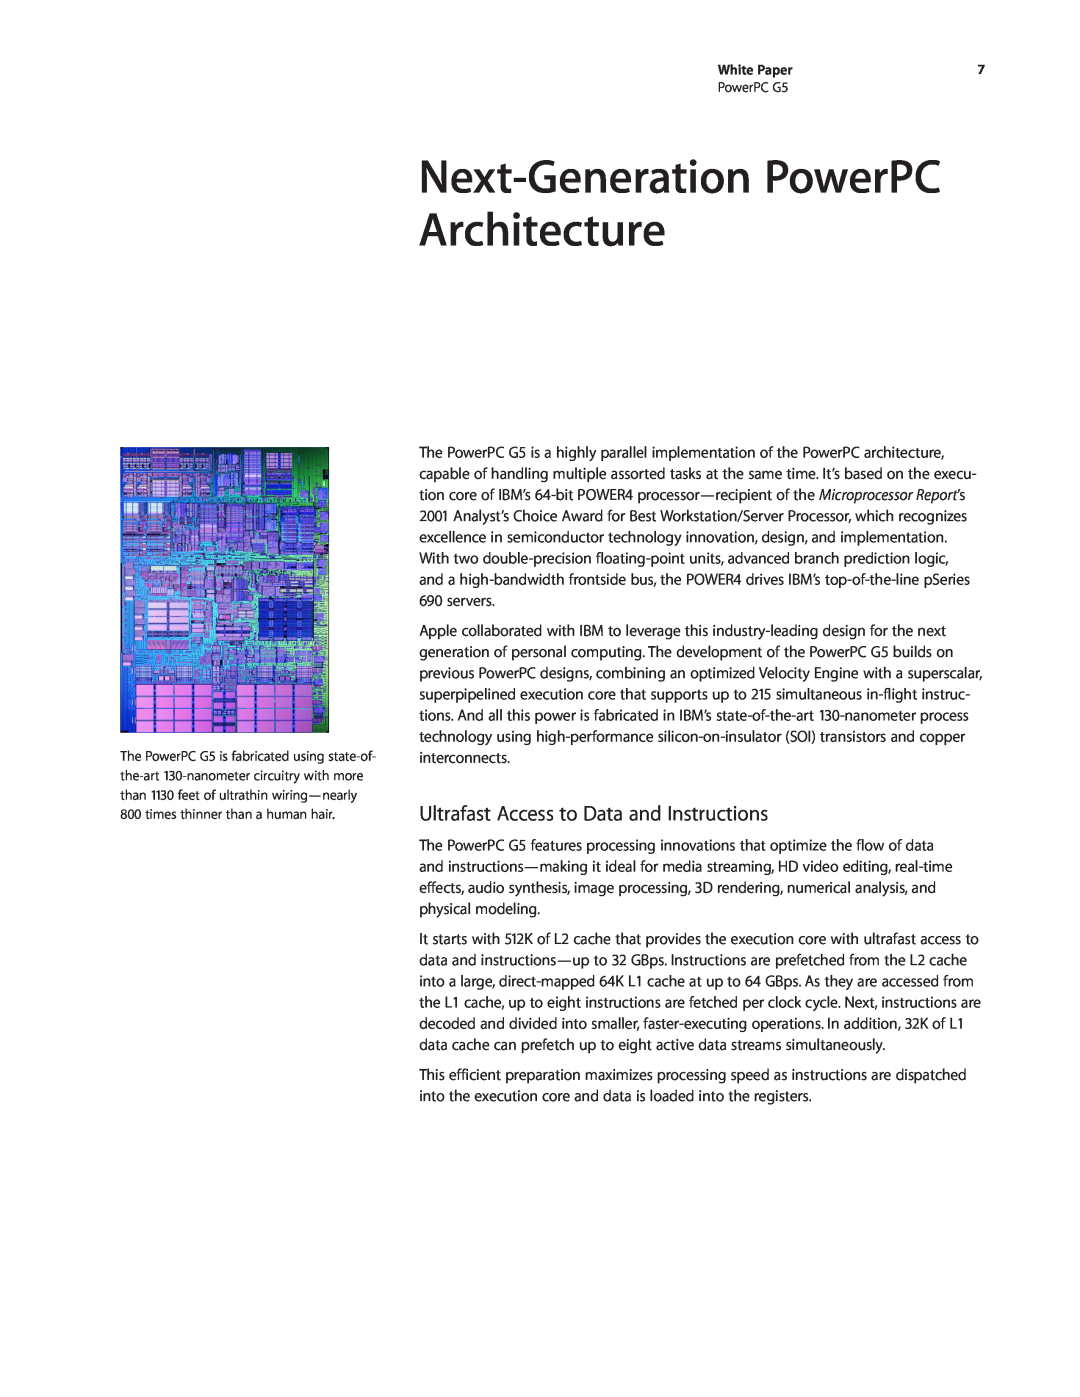 Apple PowerPC G5 manual Next-Generation PowerPC Architecture, Ultrafast Access to Data and Instructions 